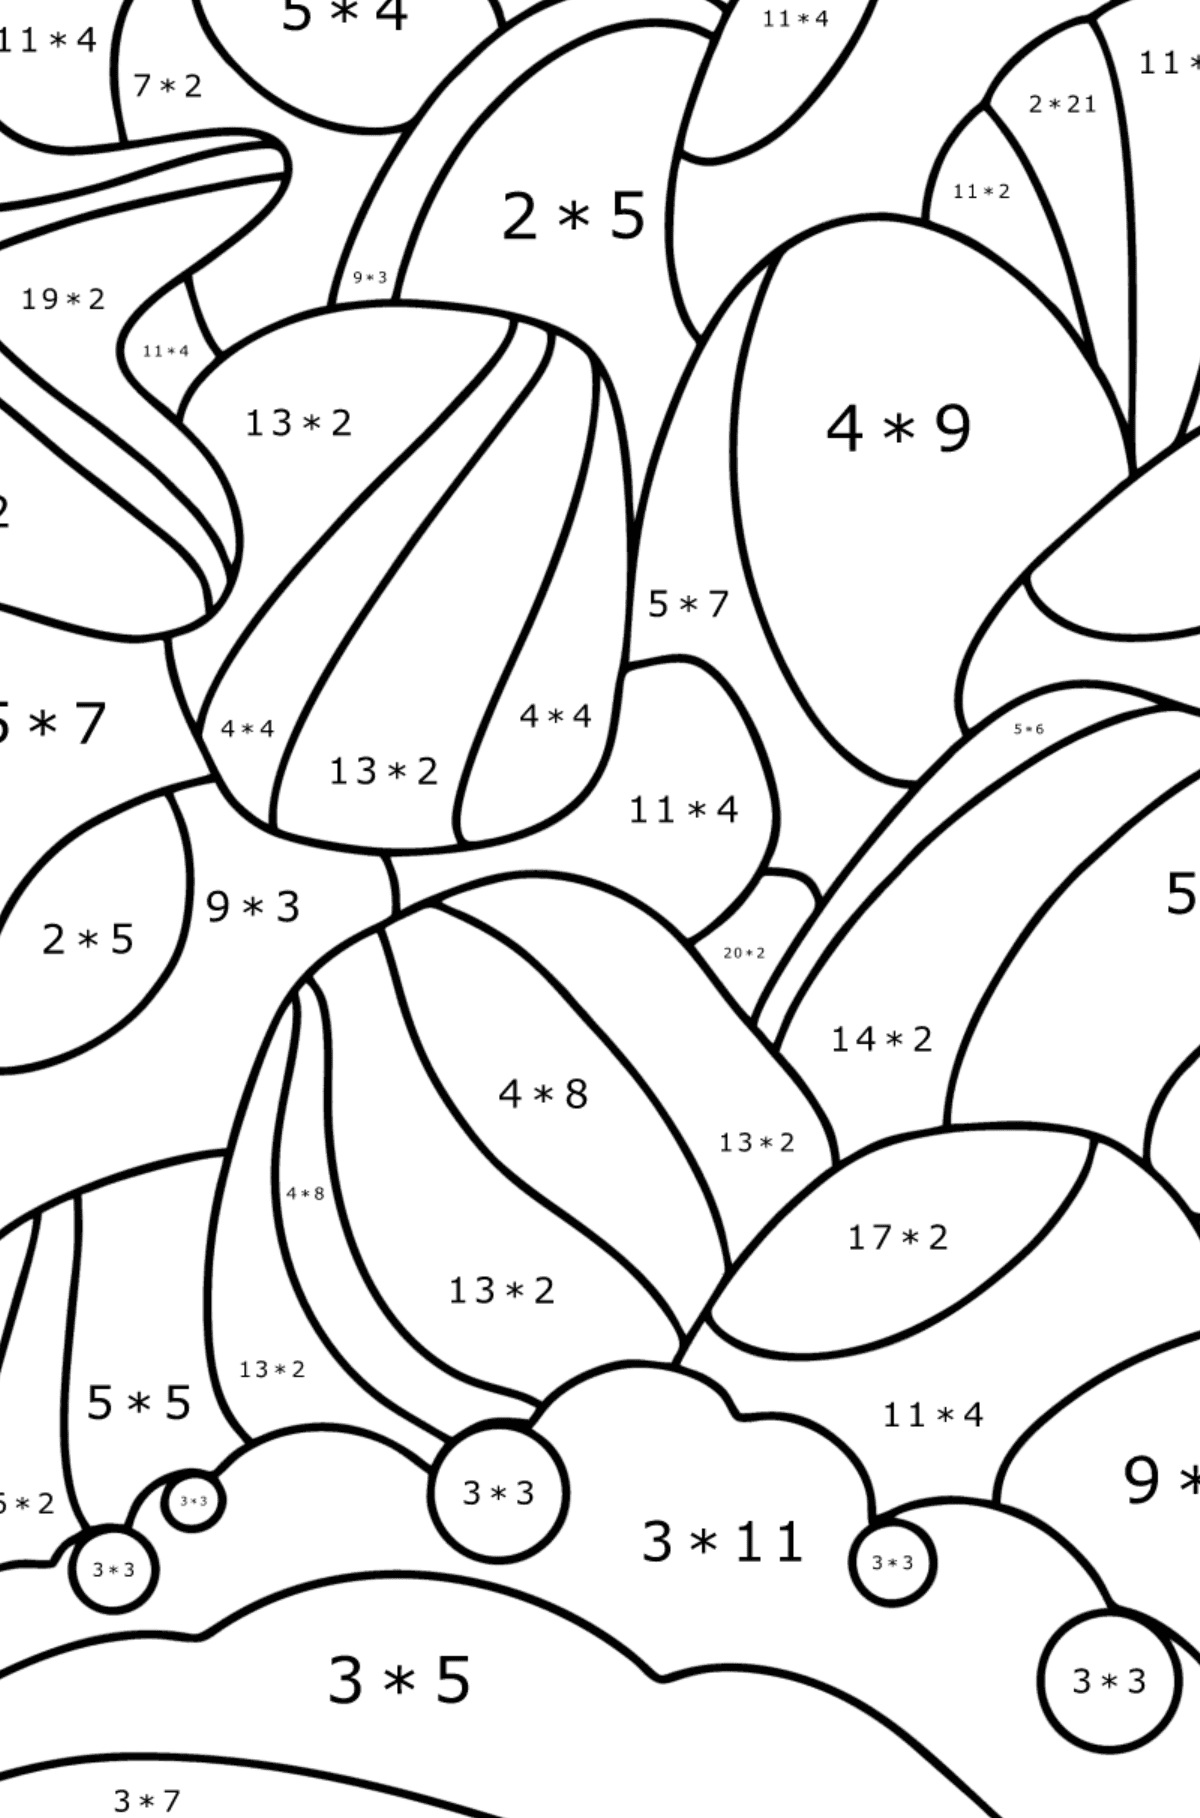 Doodle Coloring Page for Kids - Sea Pebbles - Math Coloring - Multiplication for Kids